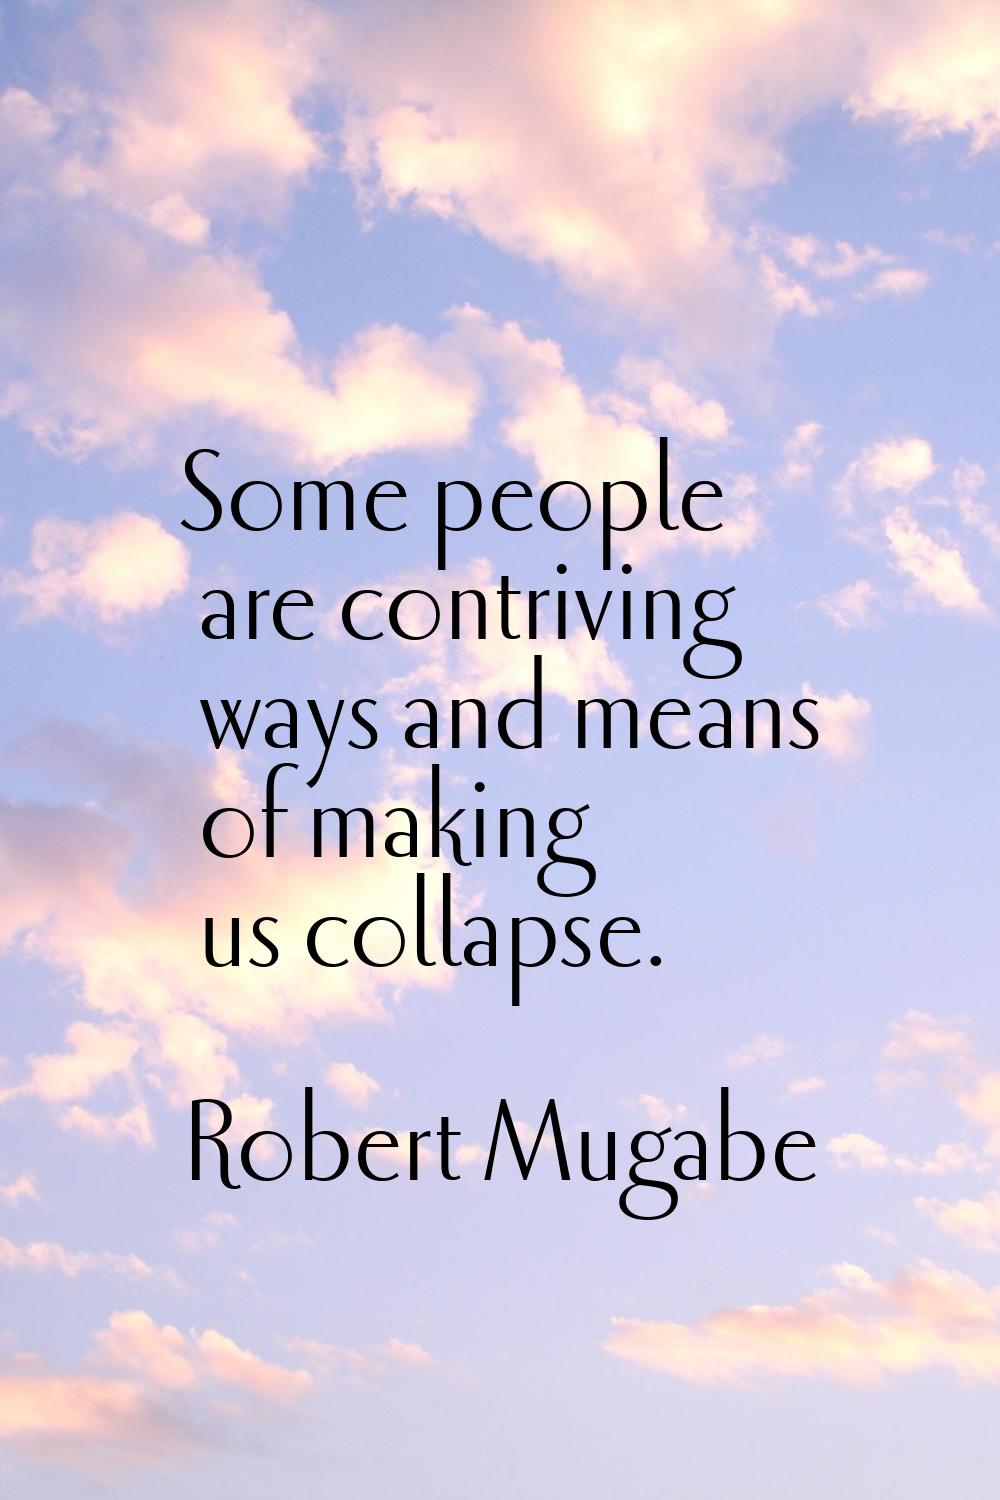 Some people are contriving ways and means of making us collapse.